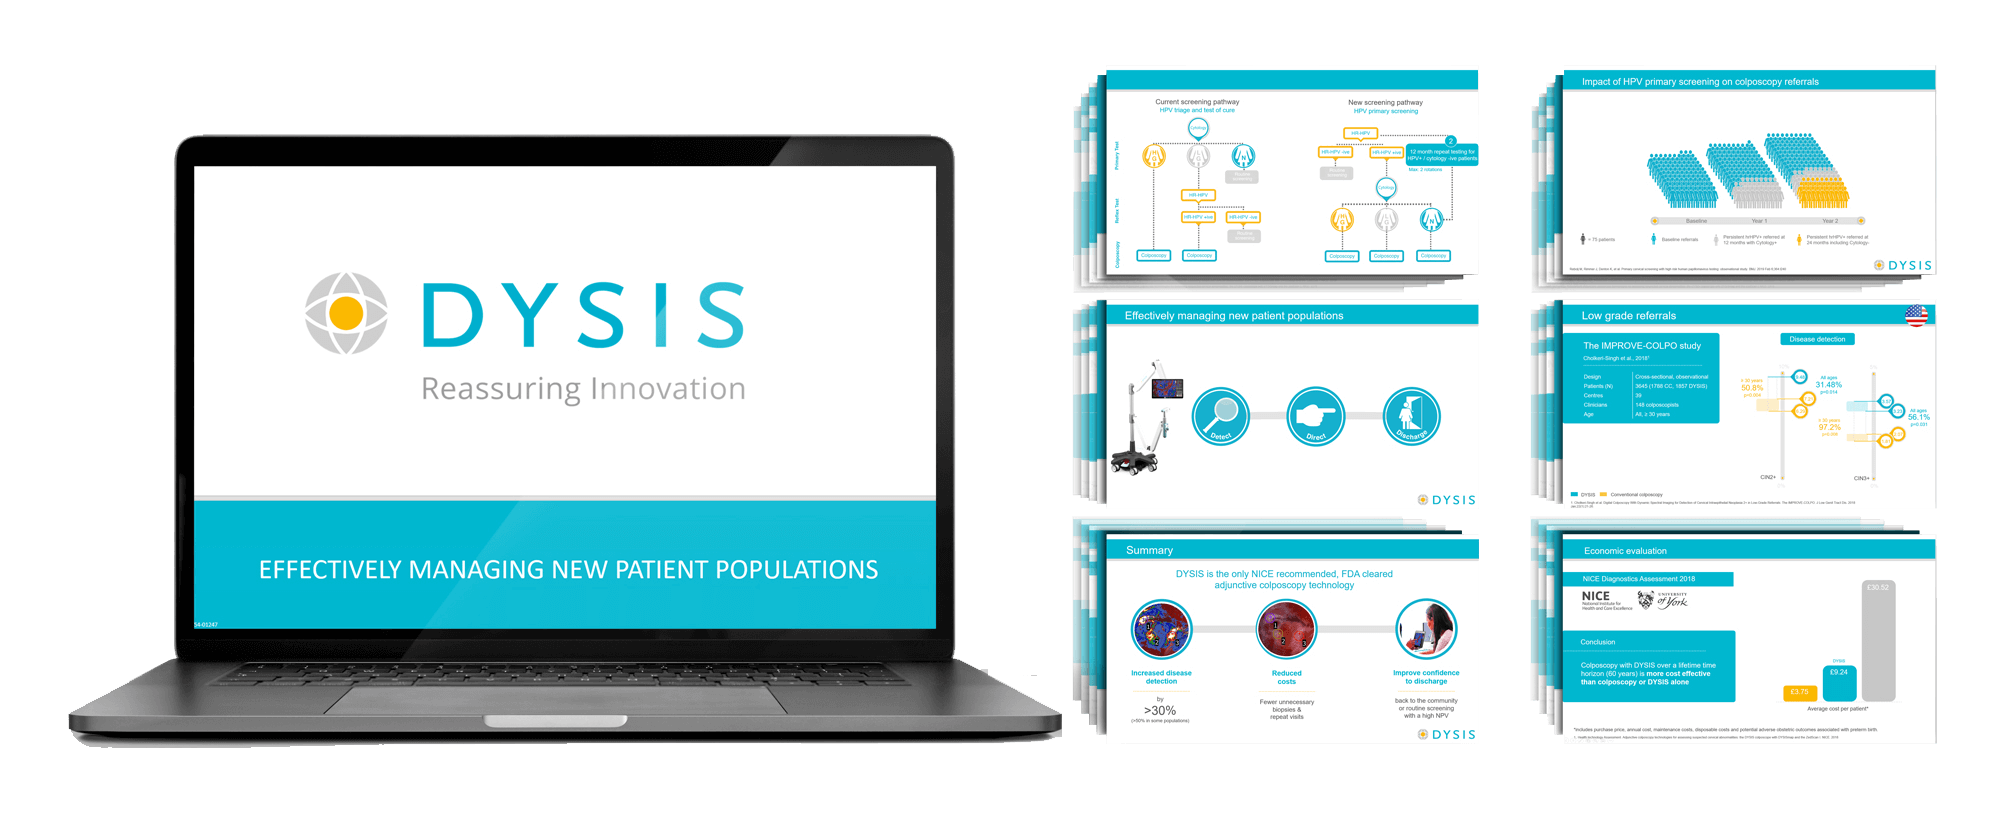 Dysis-powerpoint-sales-aid-1.png